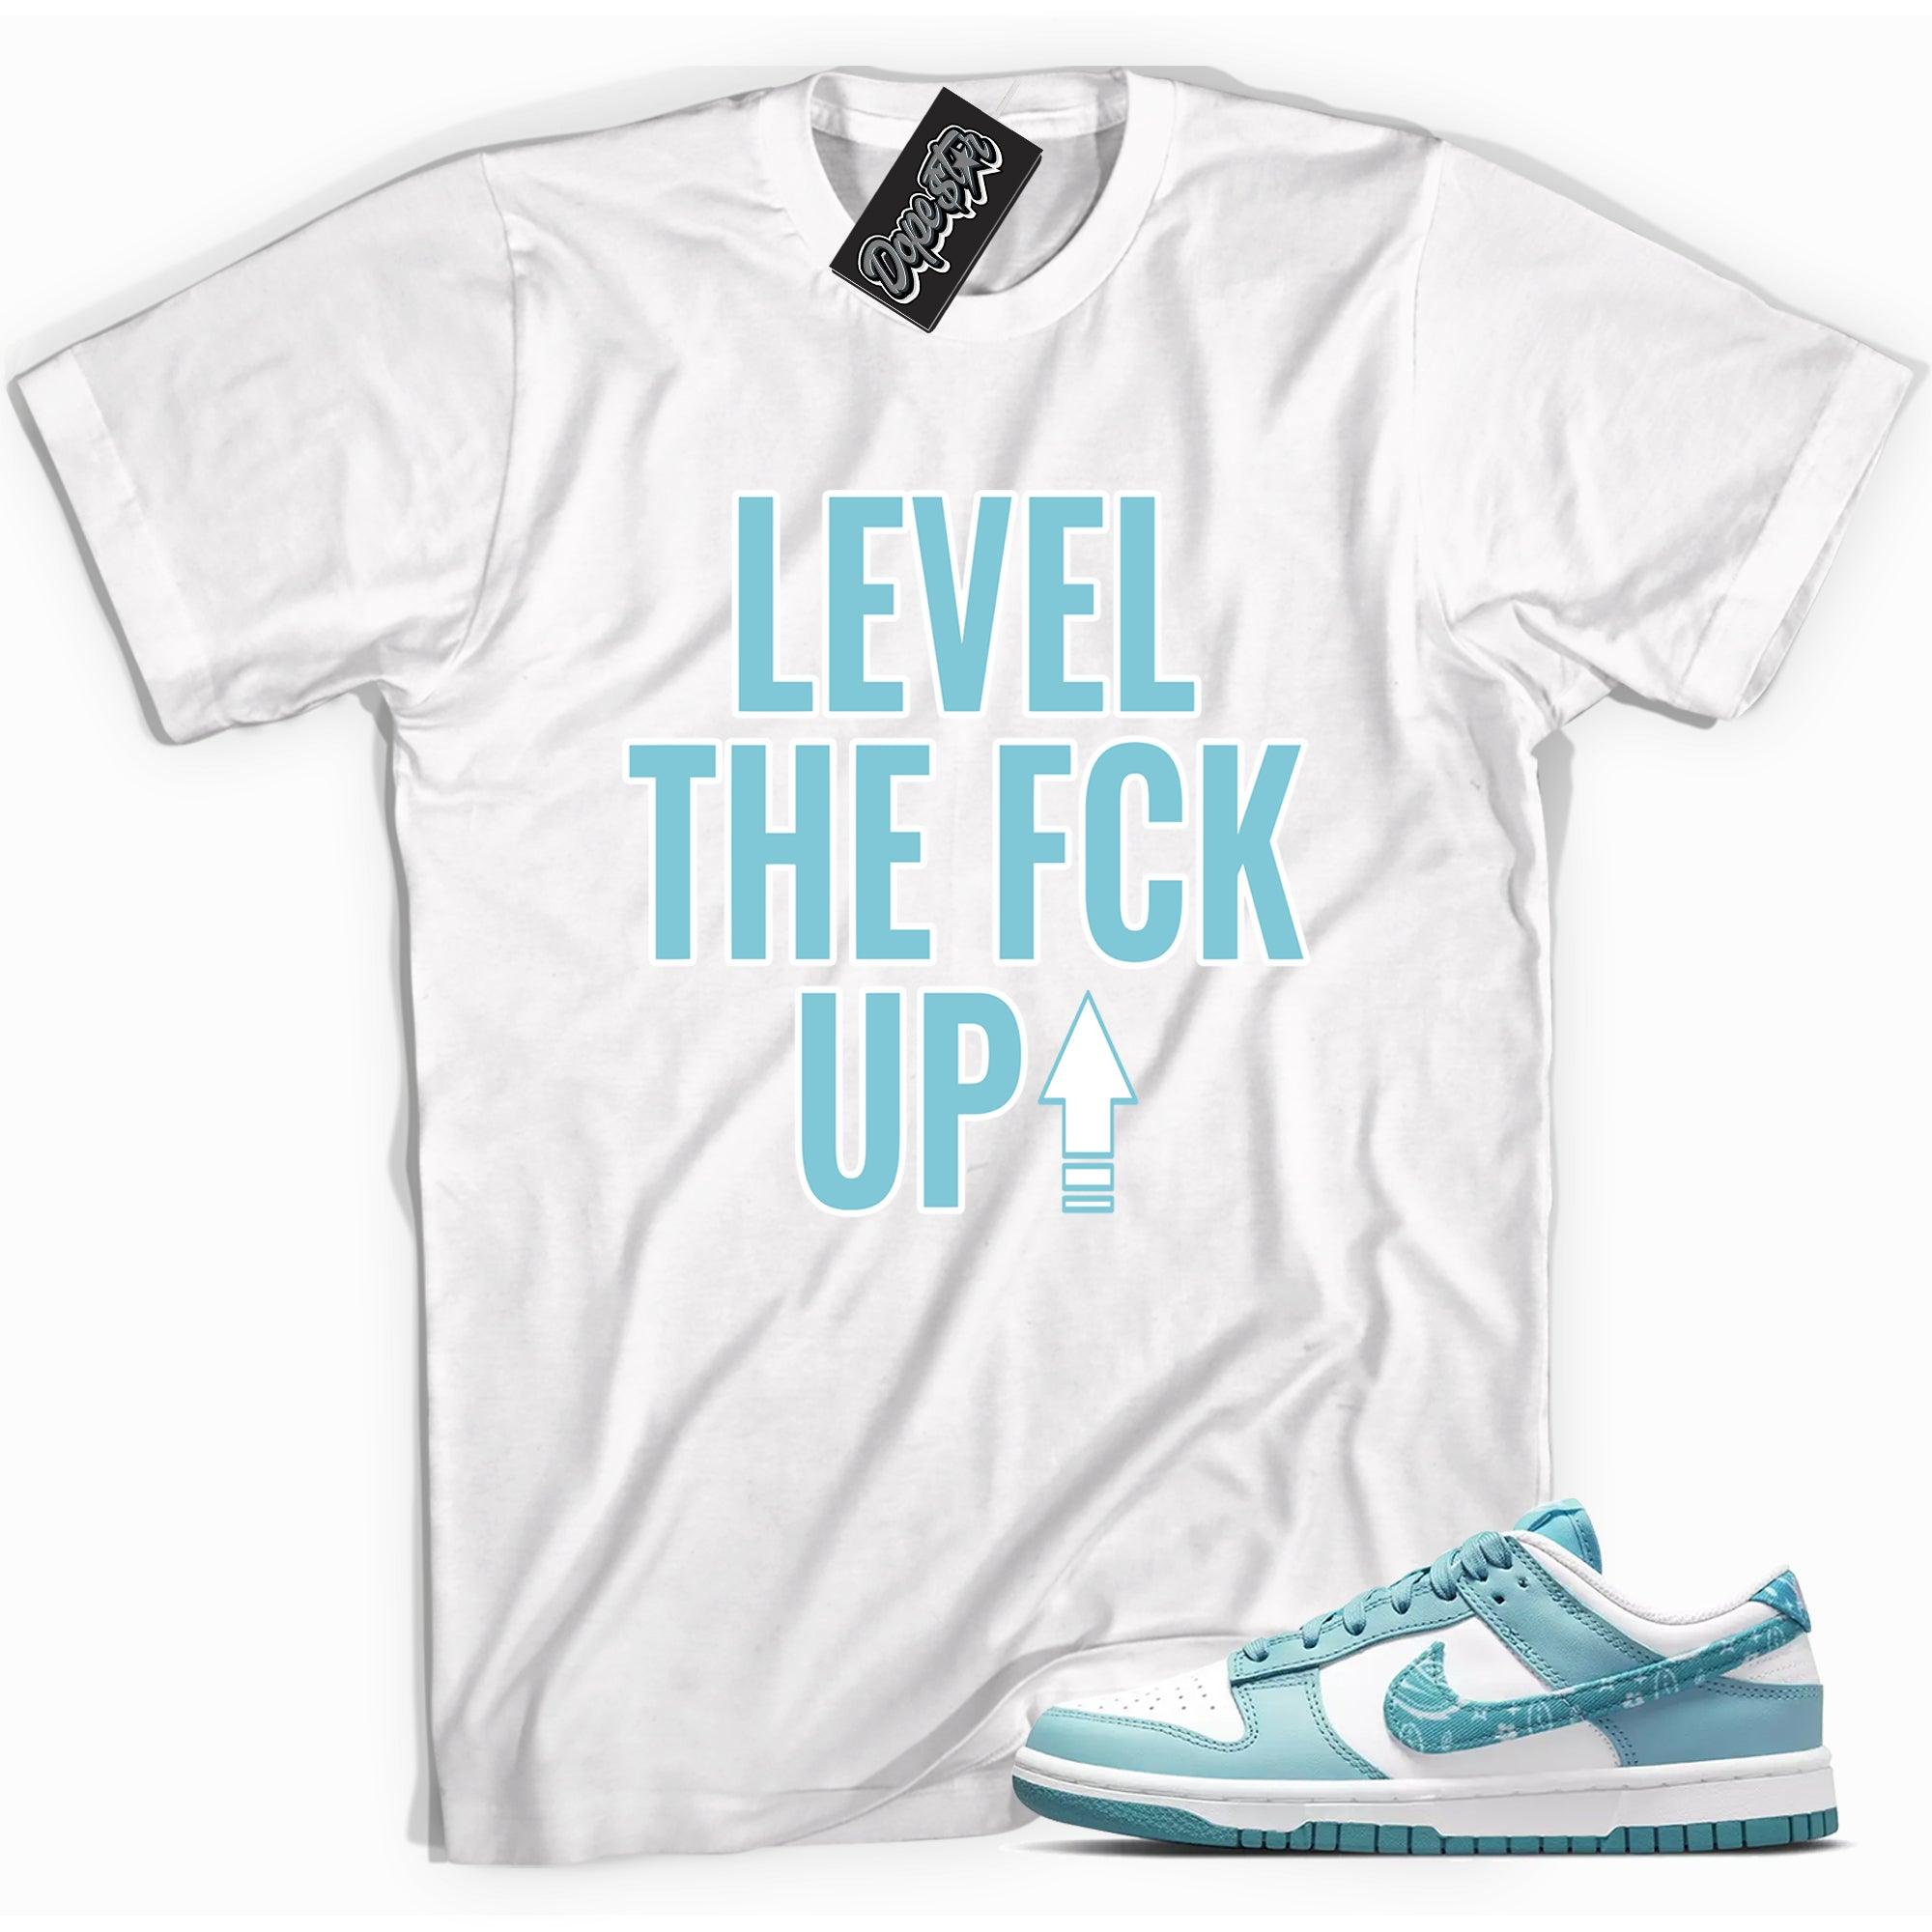 Cool white graphic tee with 'Level Up' print, that perfectly matches Nike Dunk Low Essential Paisley Pack Worn Blue sneakers.